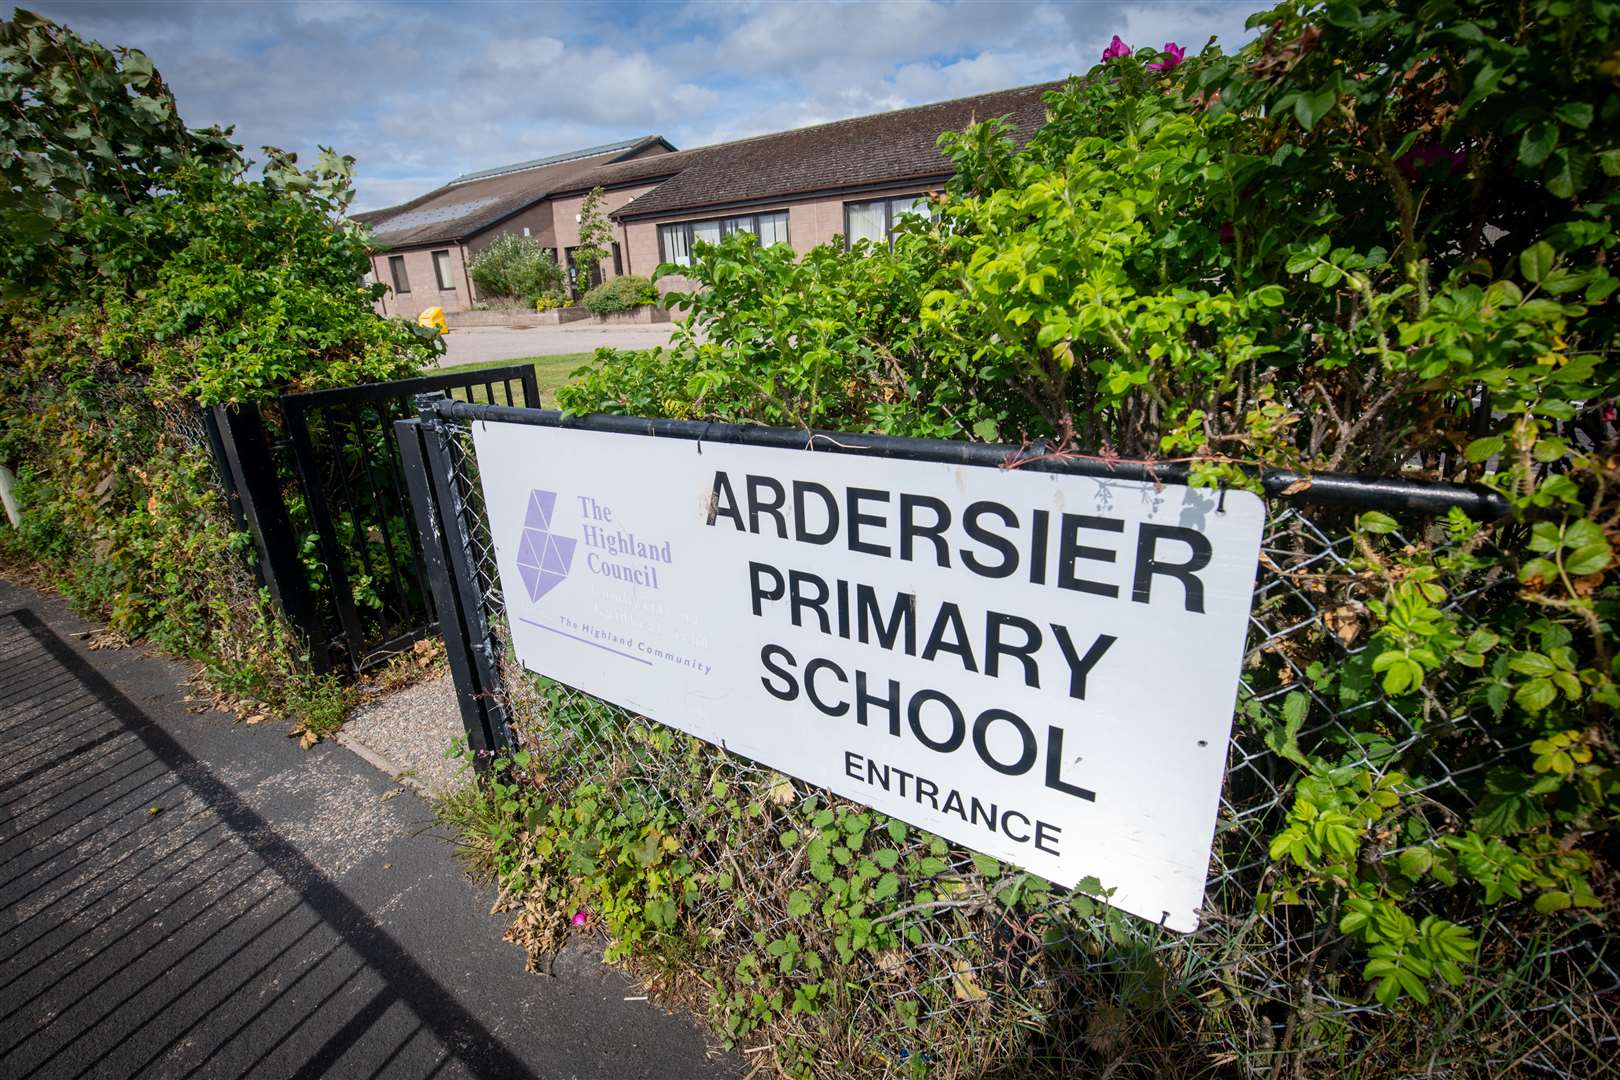 The nursery is located within Ardersier Primary School.